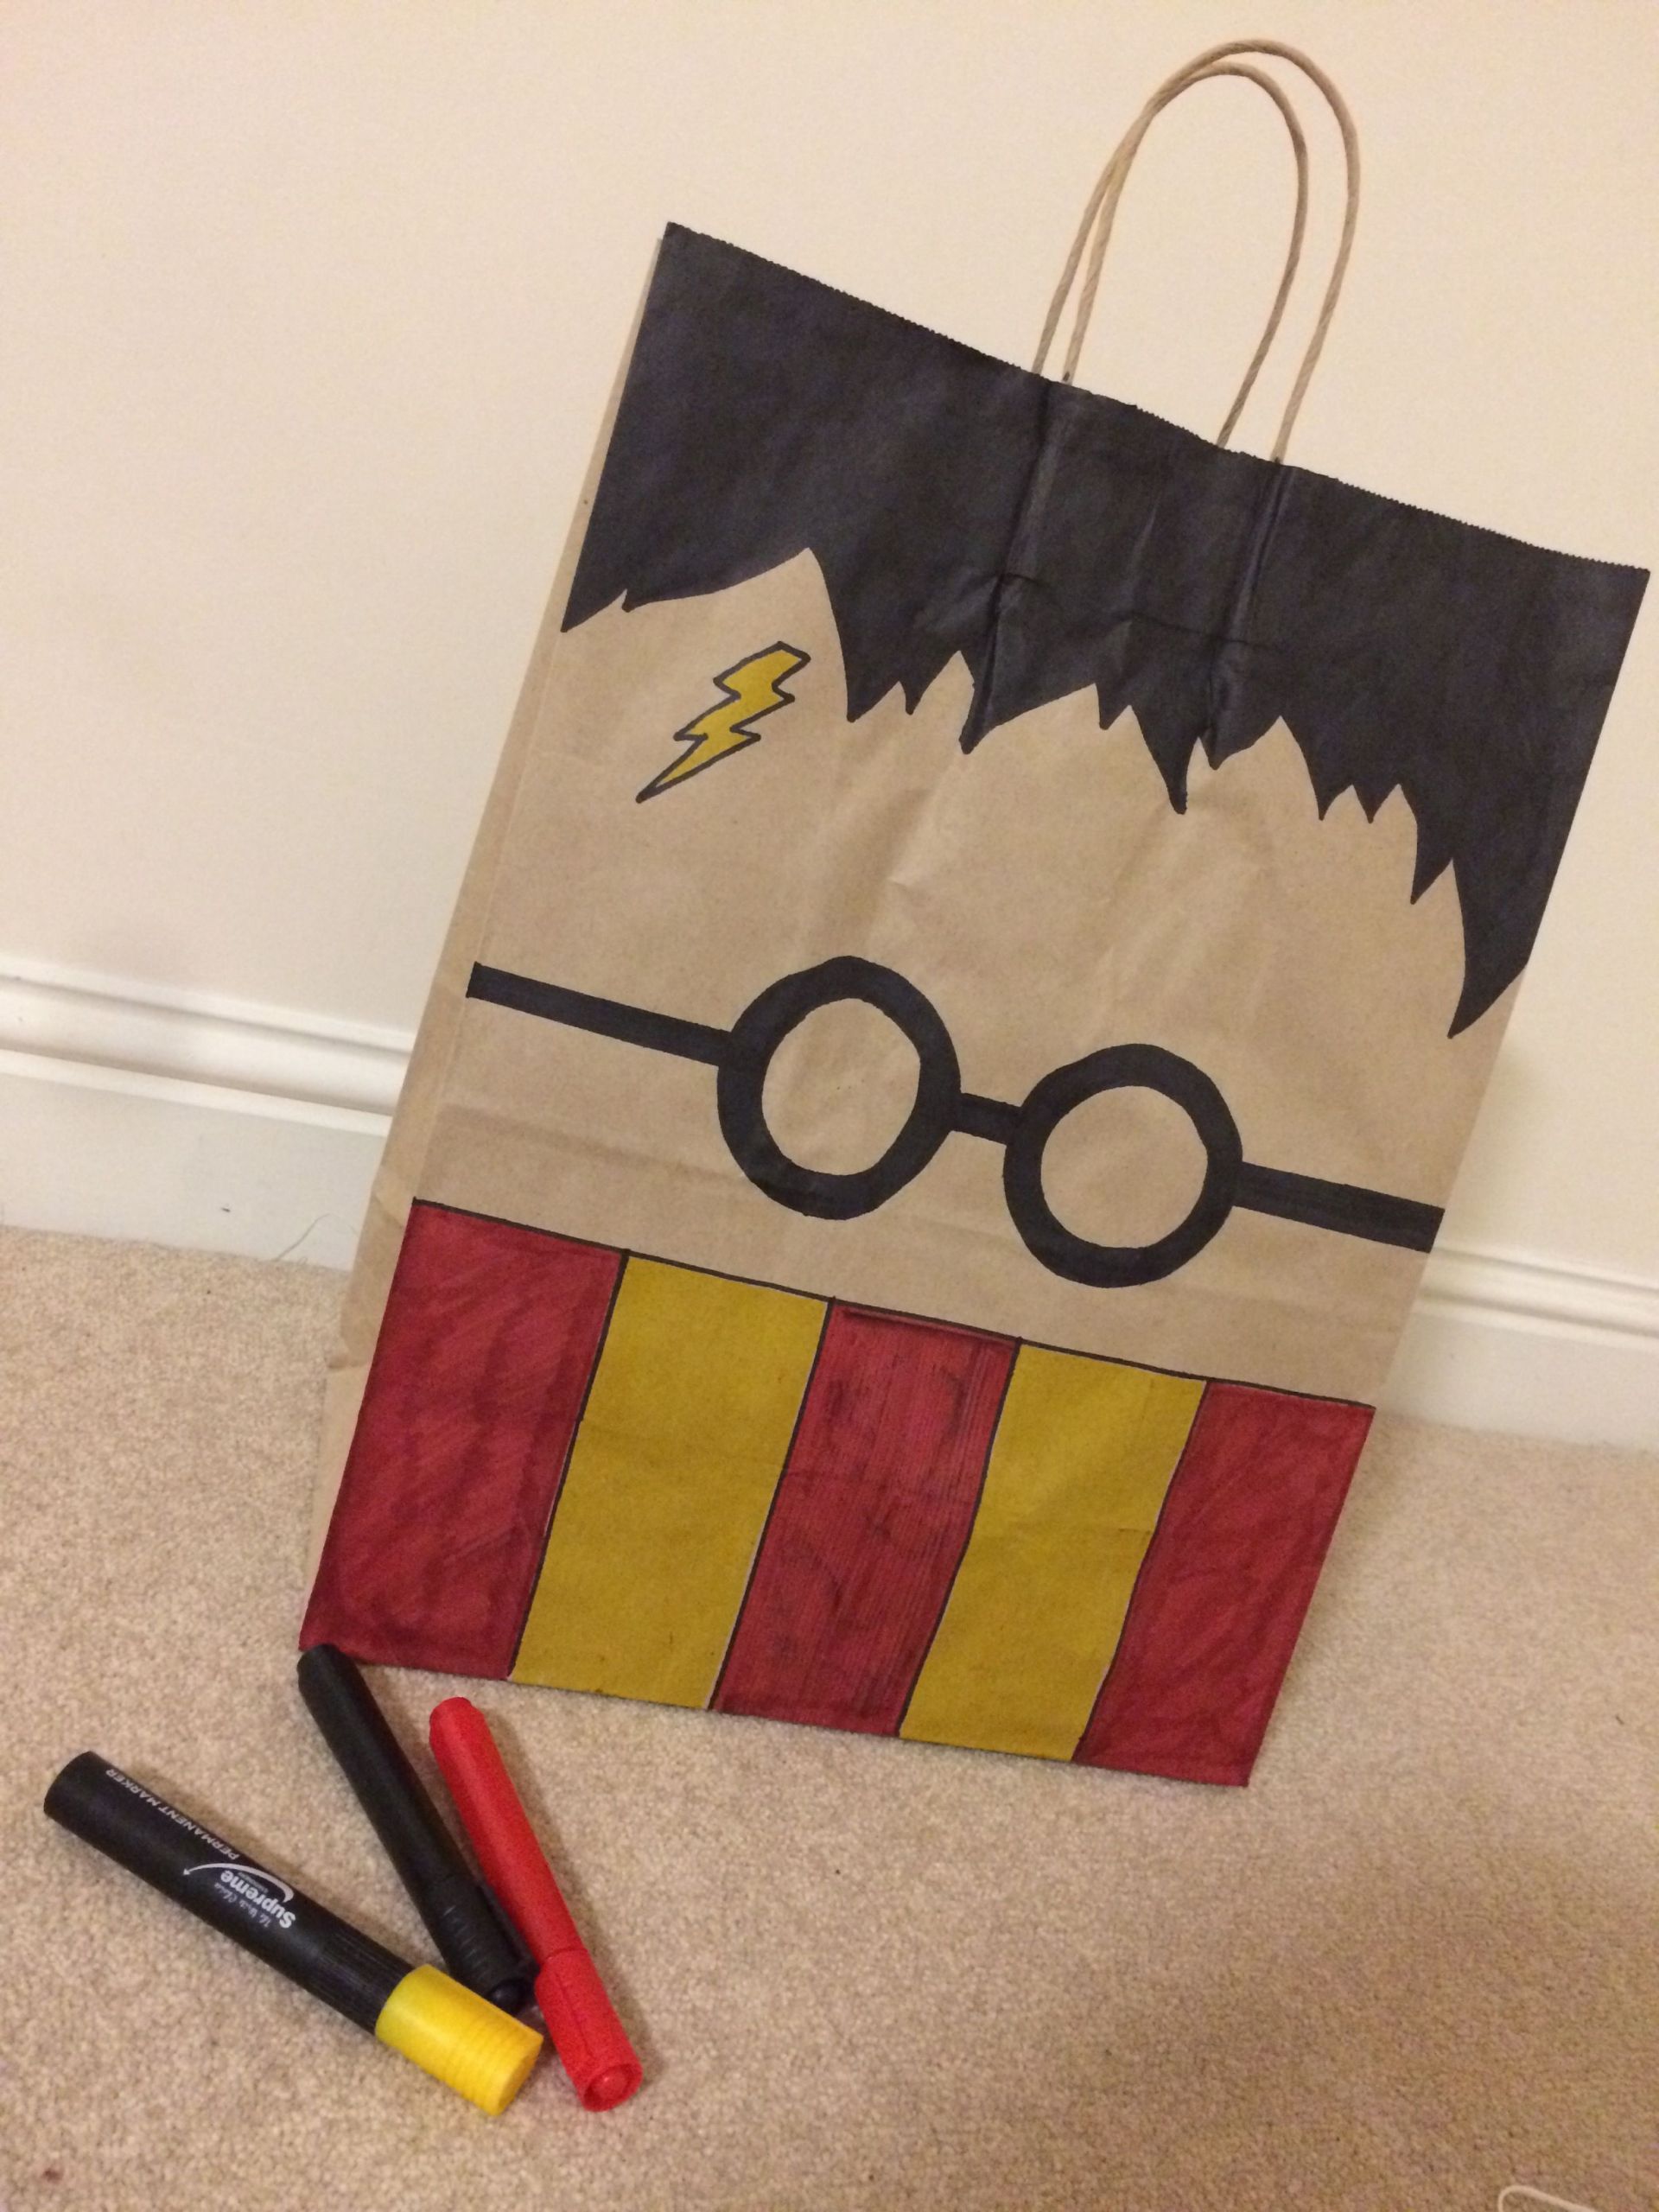 Harry Potter Birthday Gifts
 DIY Harry Potter Gift bag in 2019